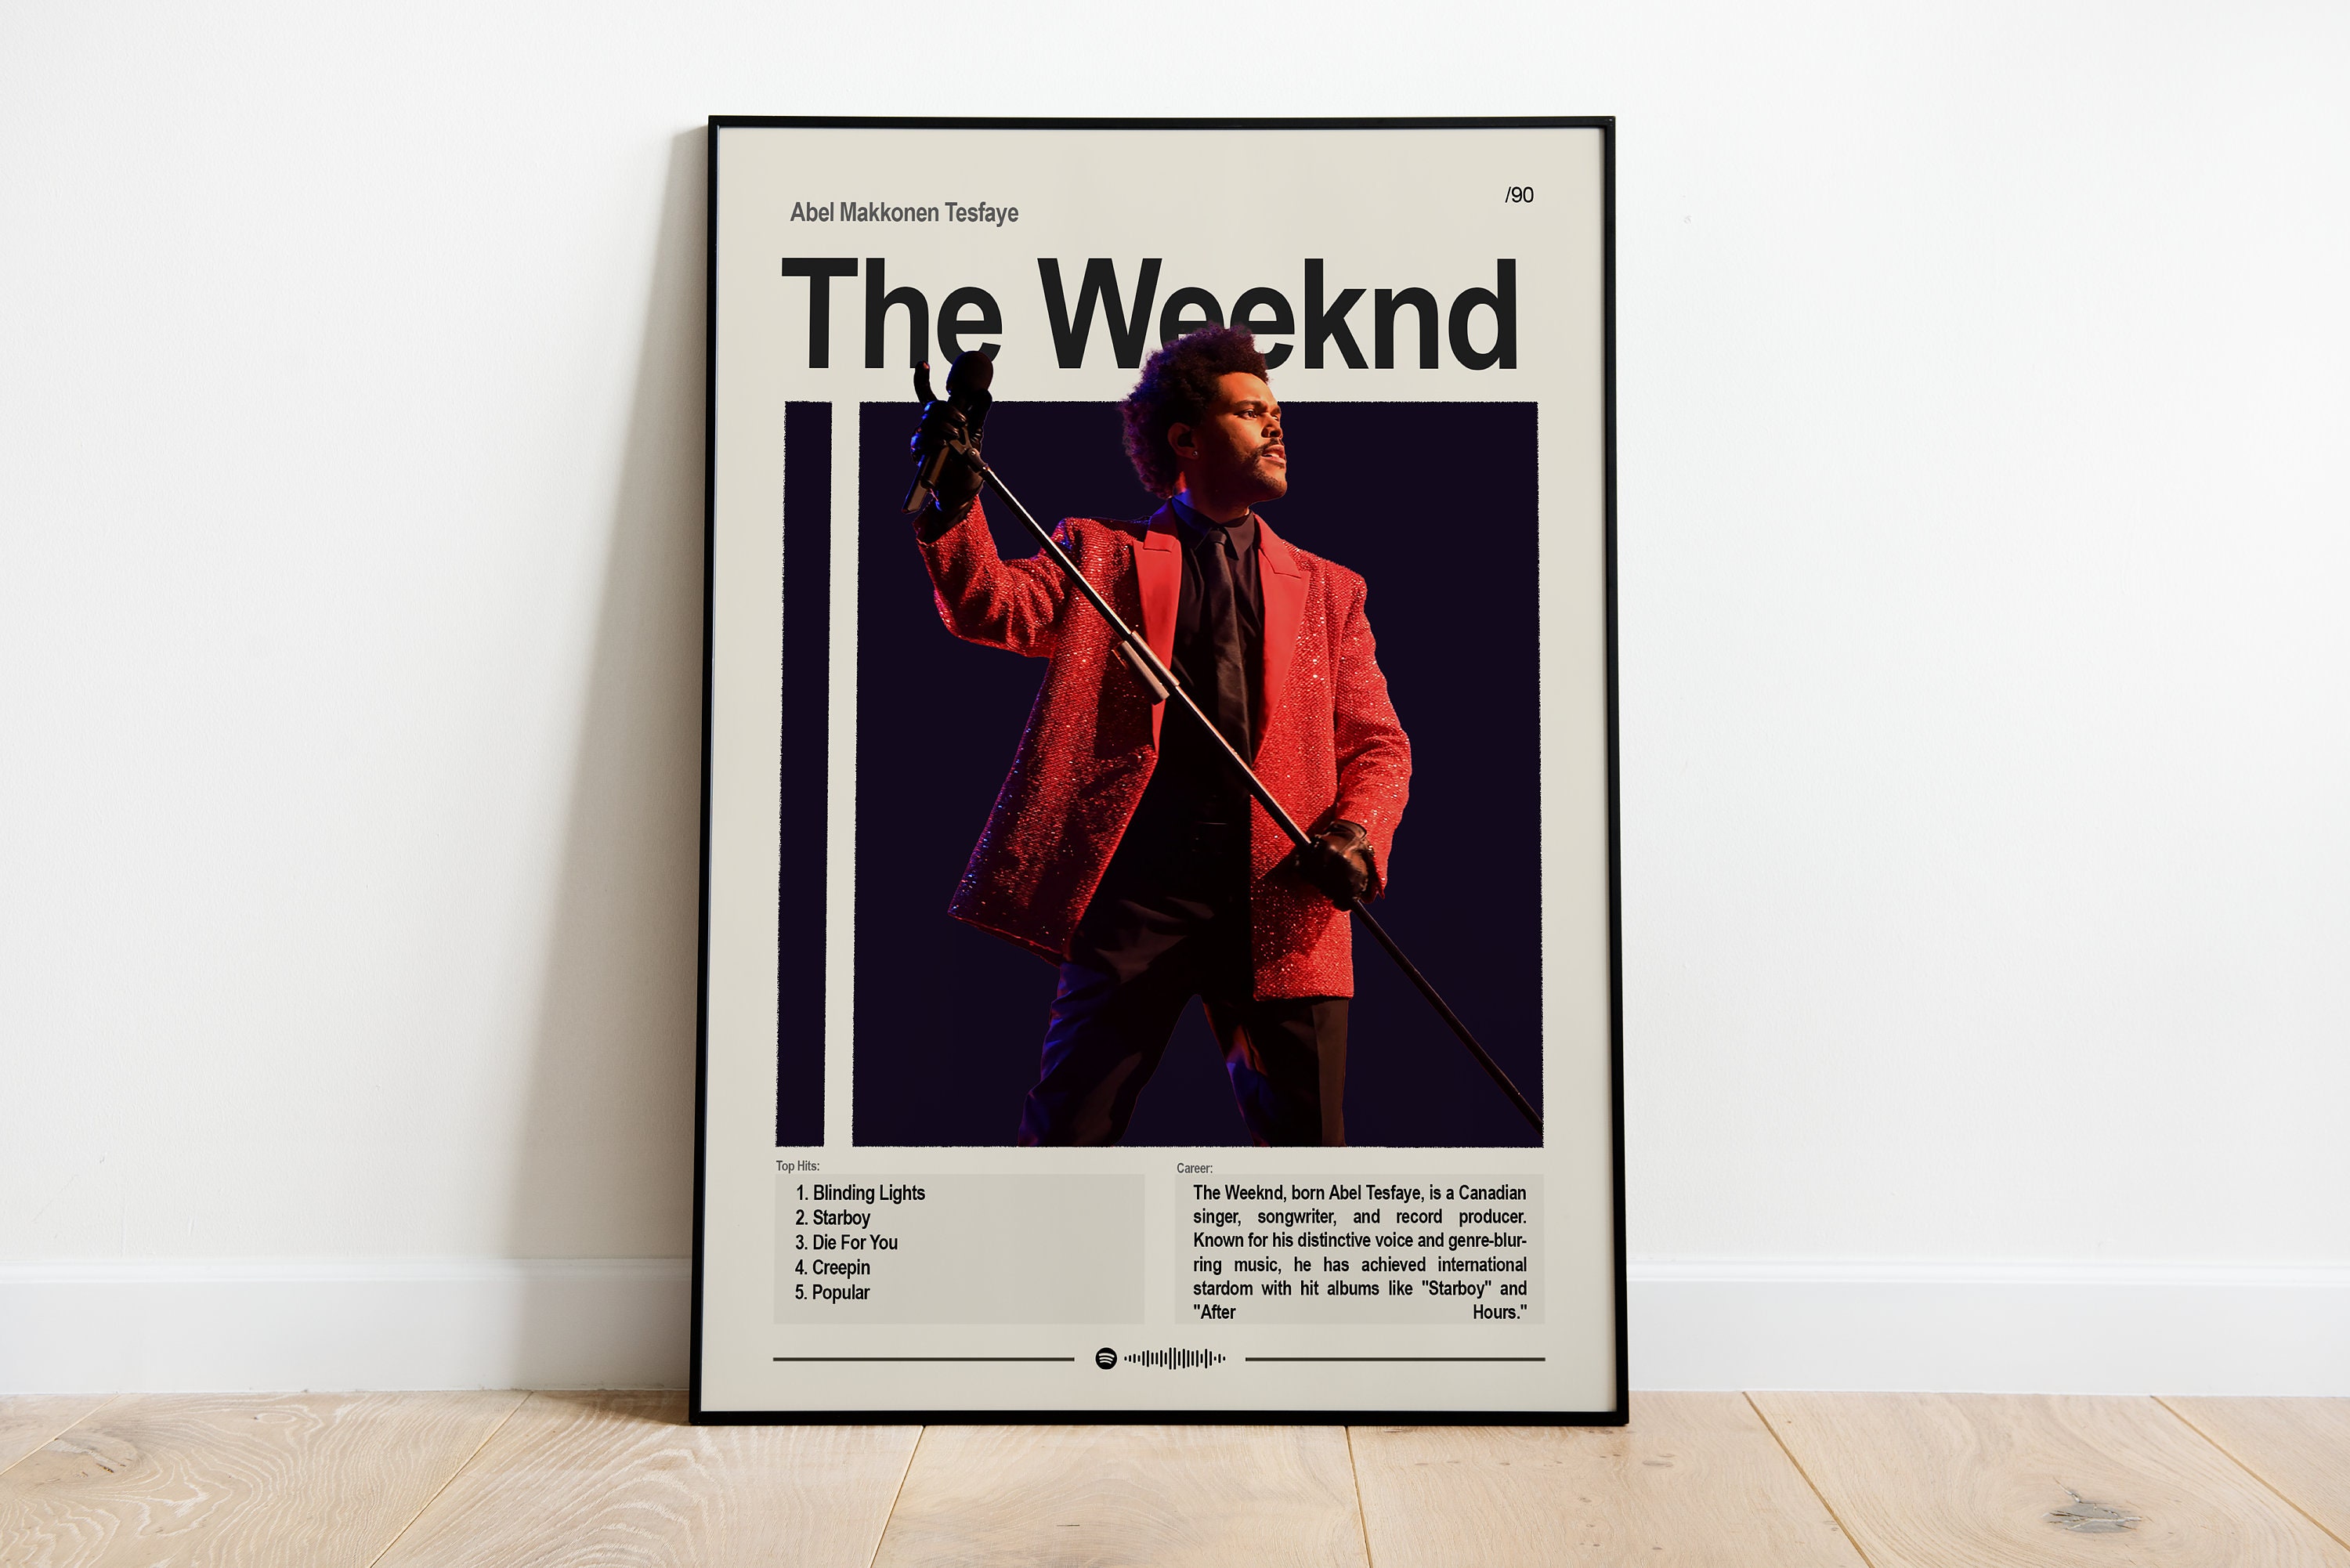 After Hours Minimalist Poster - The Weeknd  The weeknd, The weeknd poster,  Music poster design